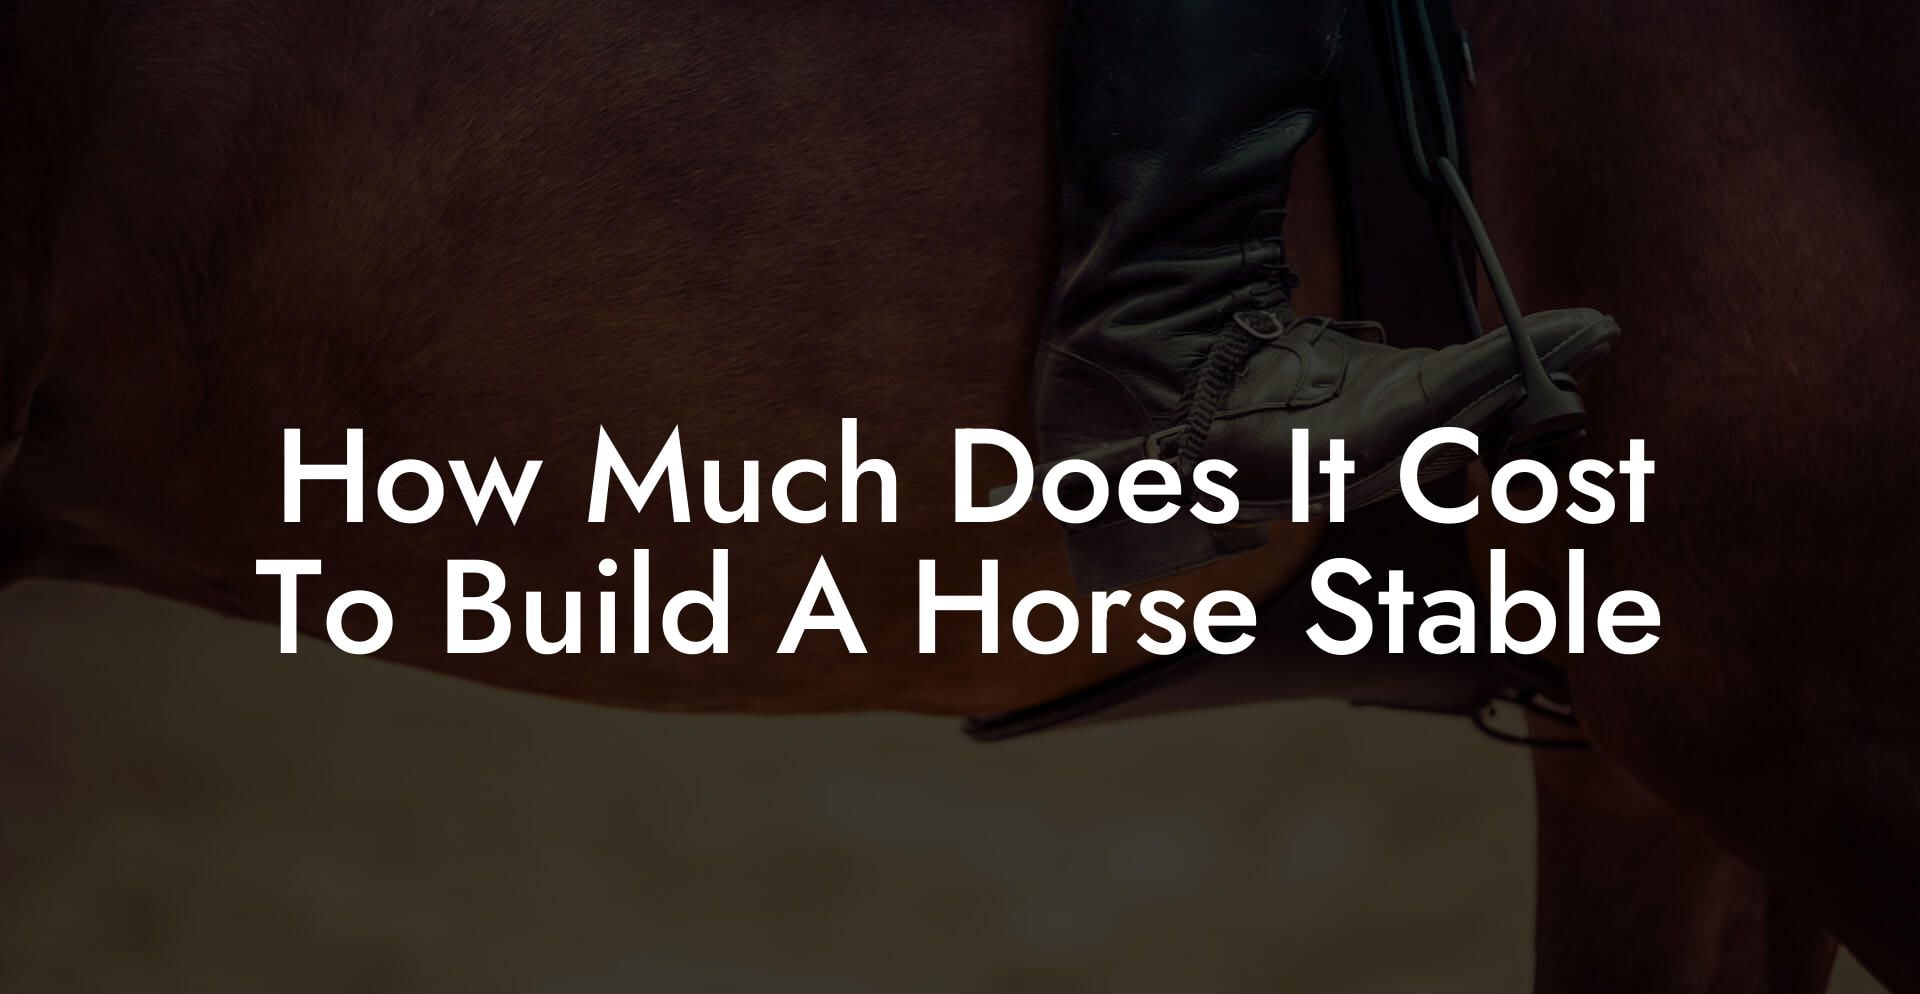 How Much Does It Cost To Build A Horse Stable